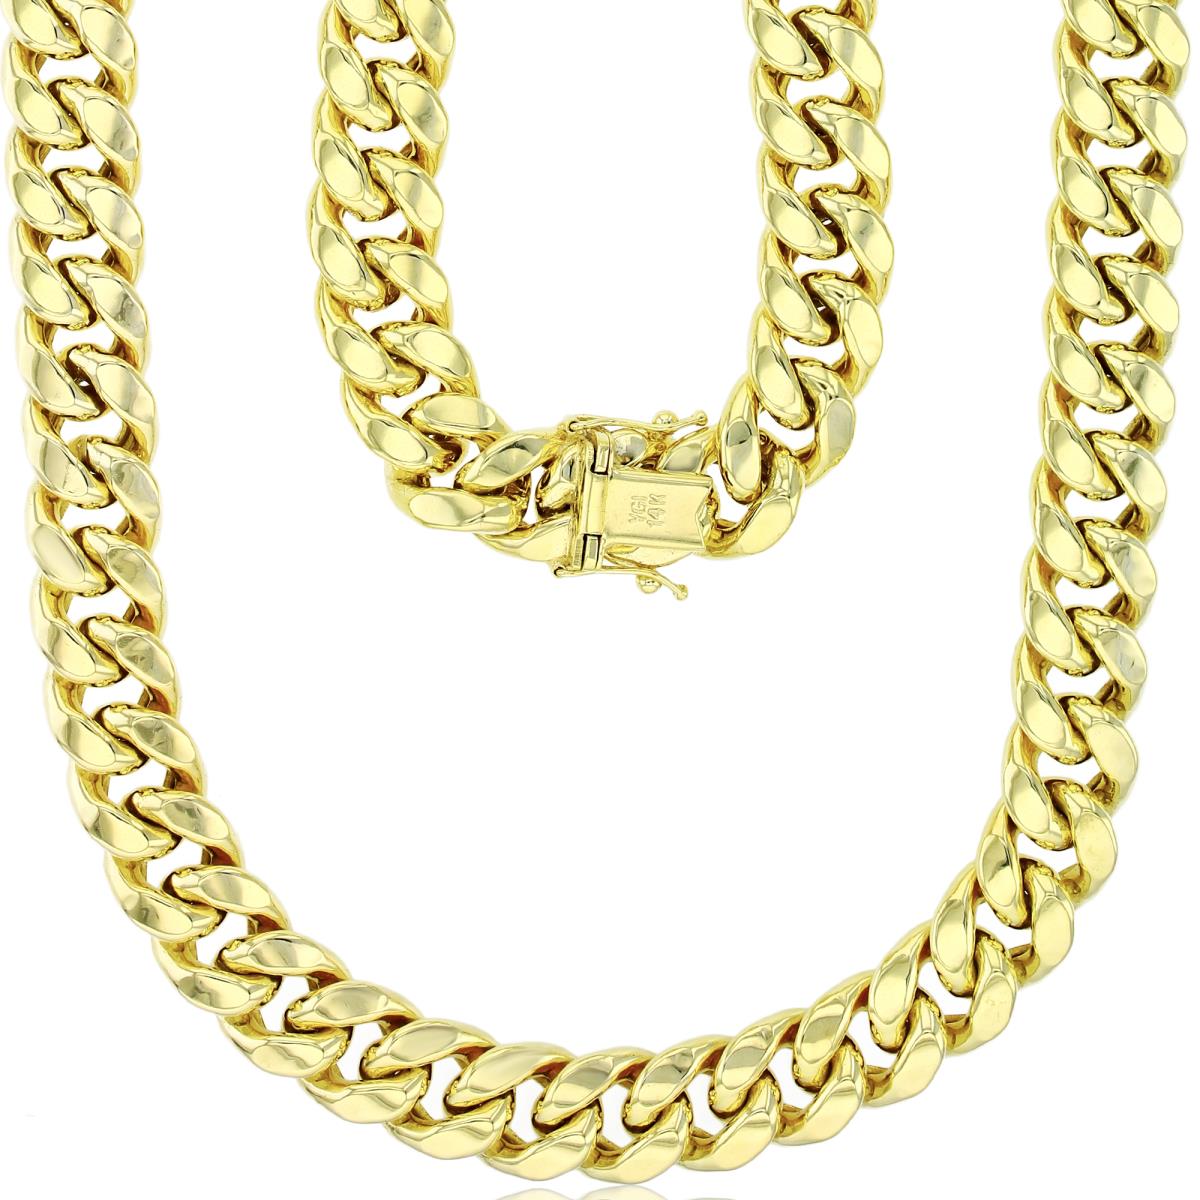 10K Yellow Gold 12mm 26" 300 Hollow Miami Cuban Chain with Box Lock